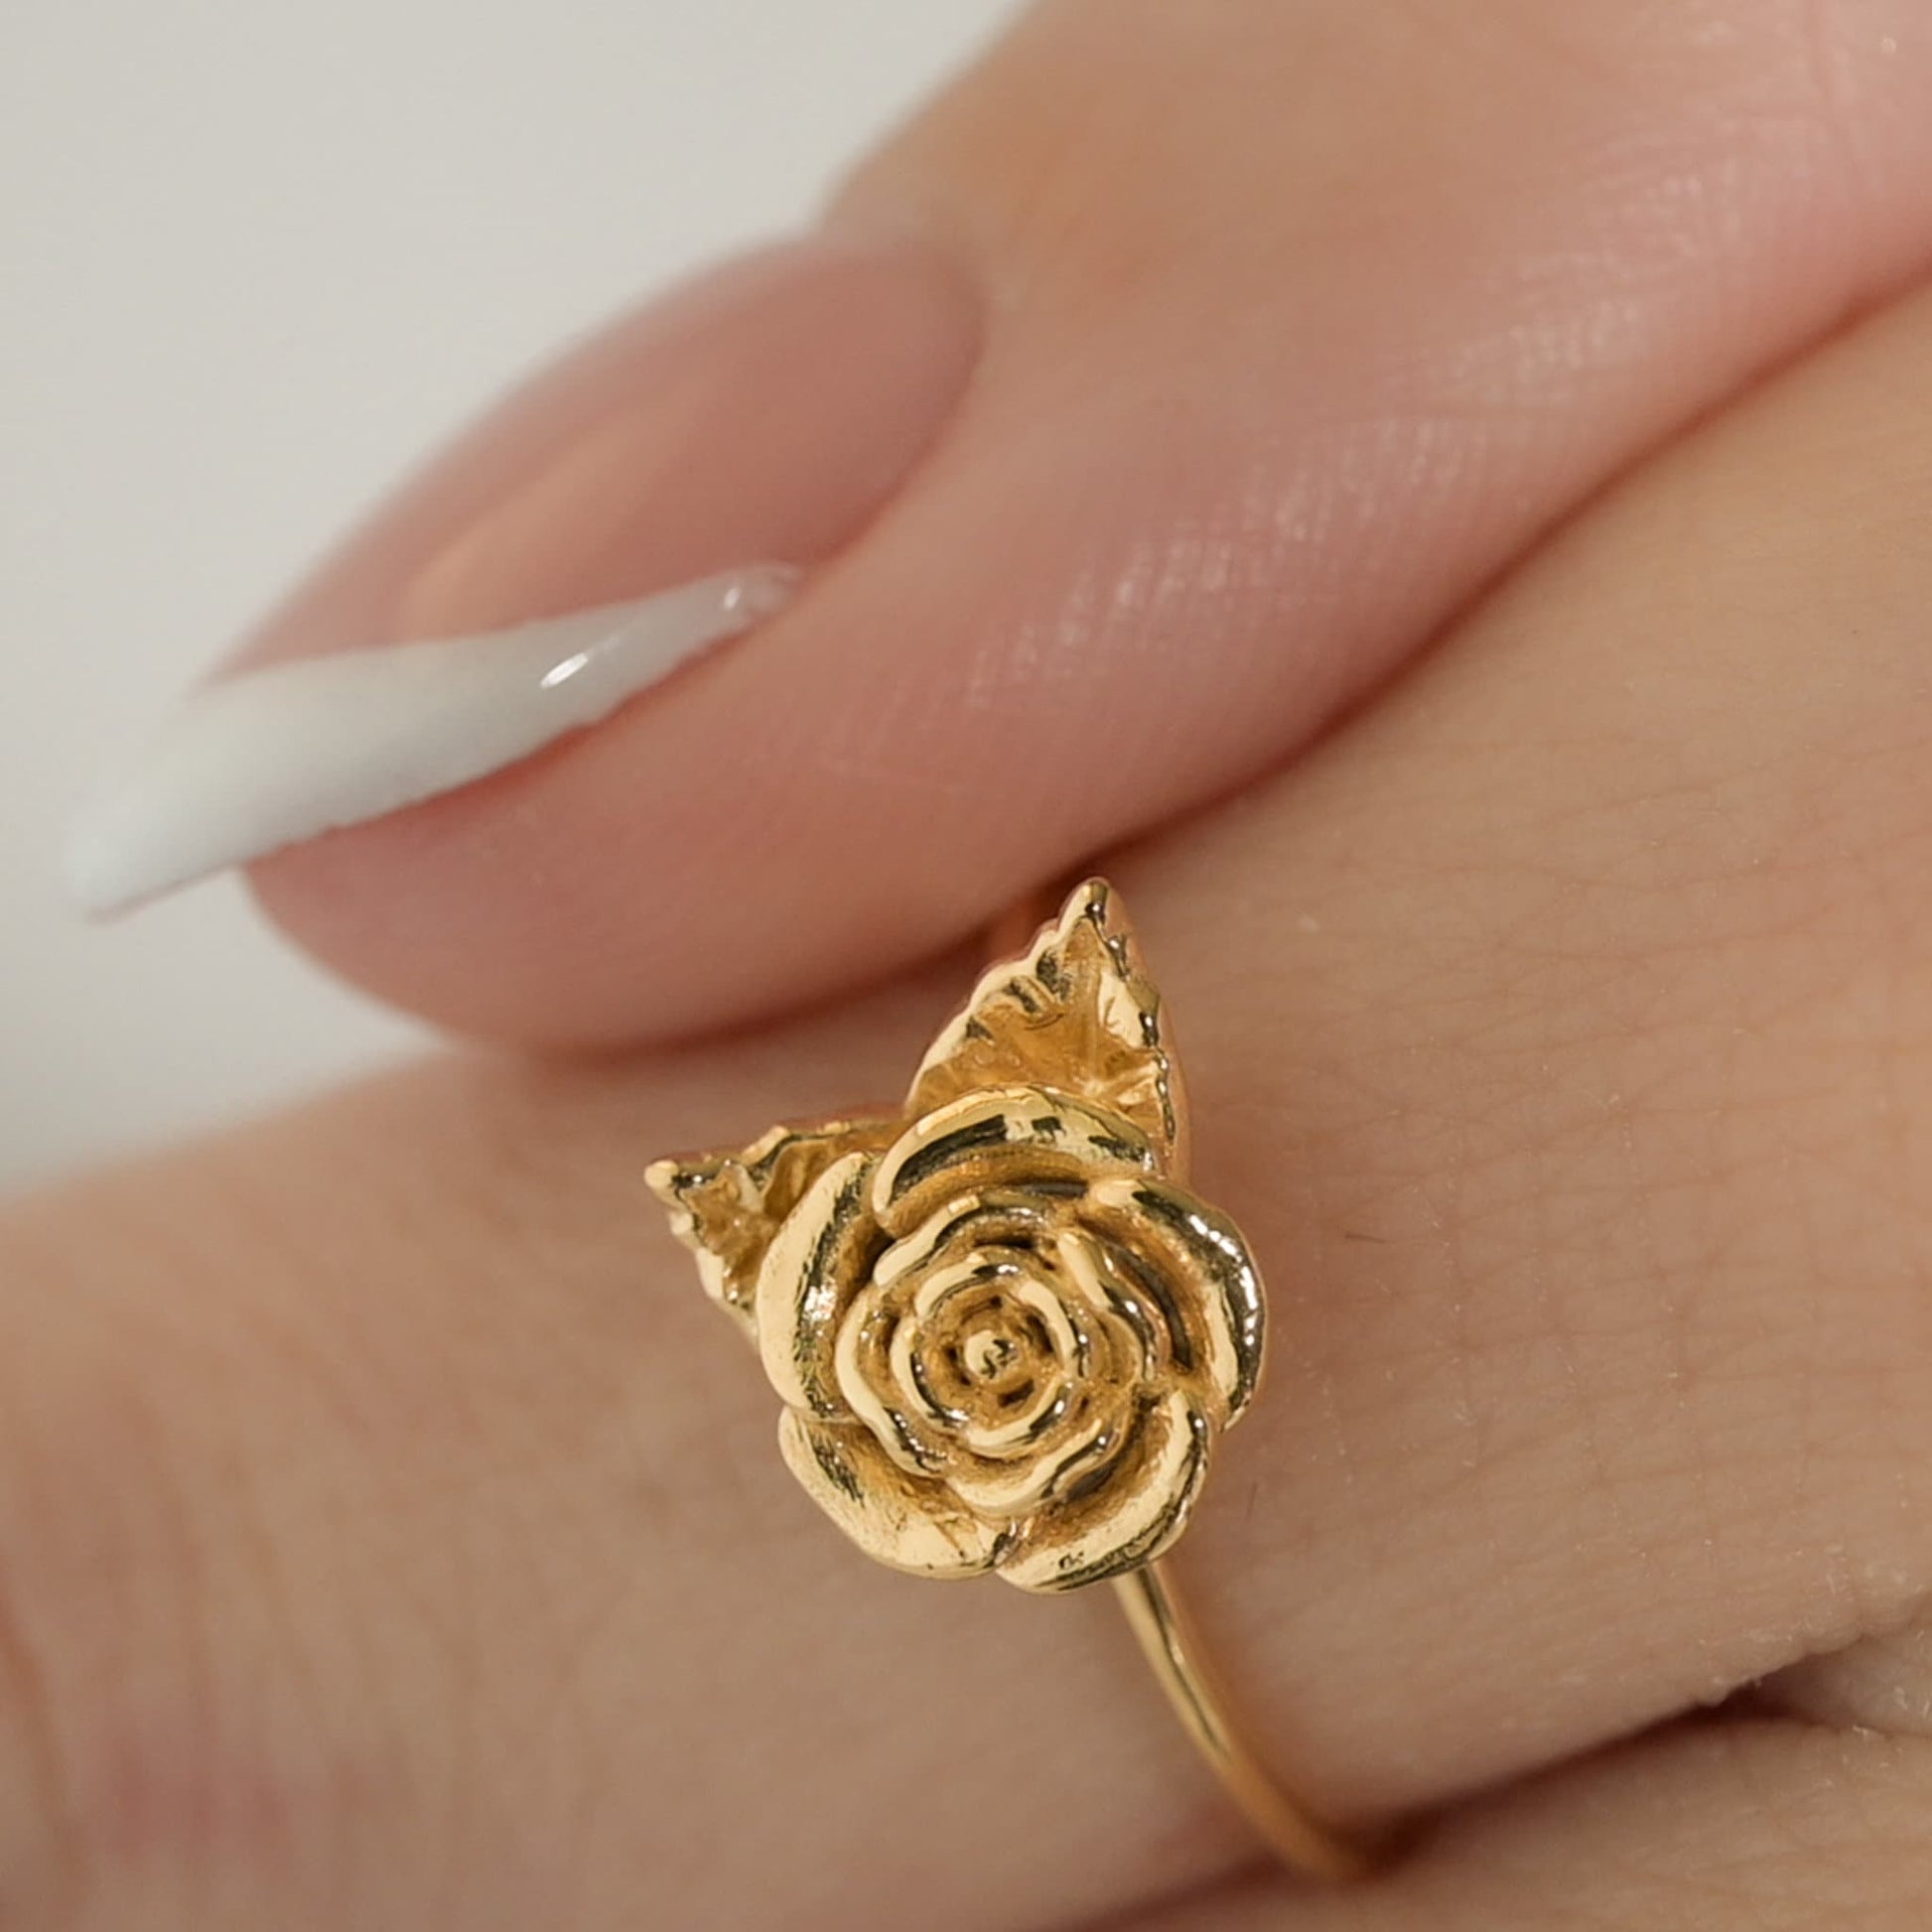 Dainty Rose Flower Ring in Solid 14K Yellow Gold, 14k White Gold, 14K Rose Gold